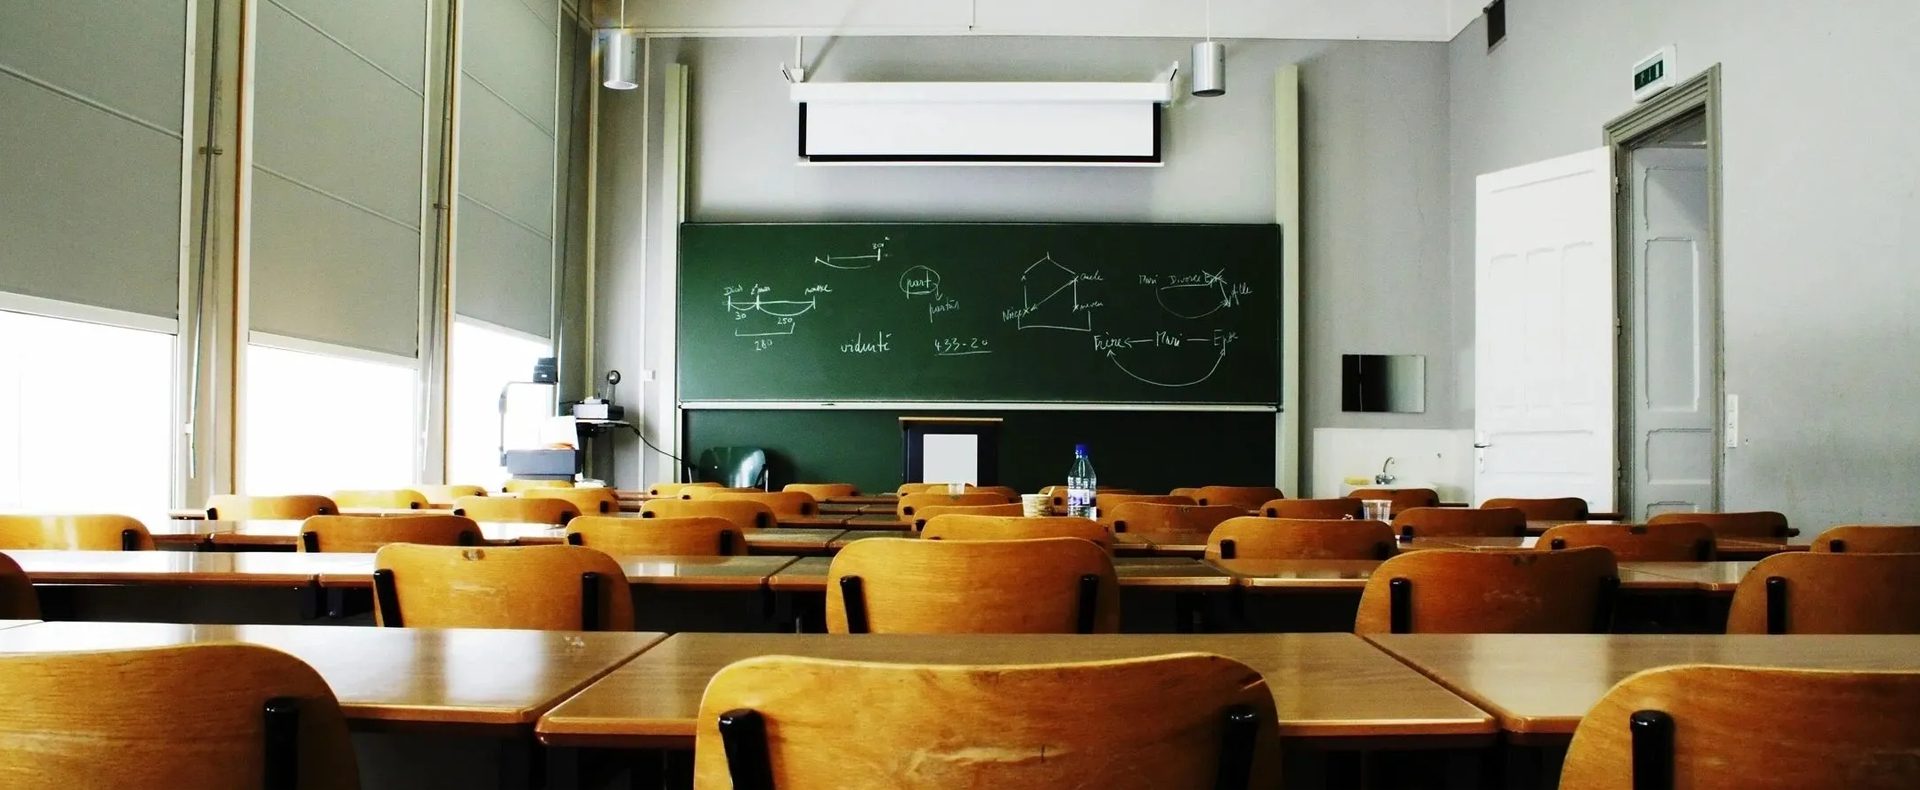 A classroom with desks and chairs in front of a chalkboard.